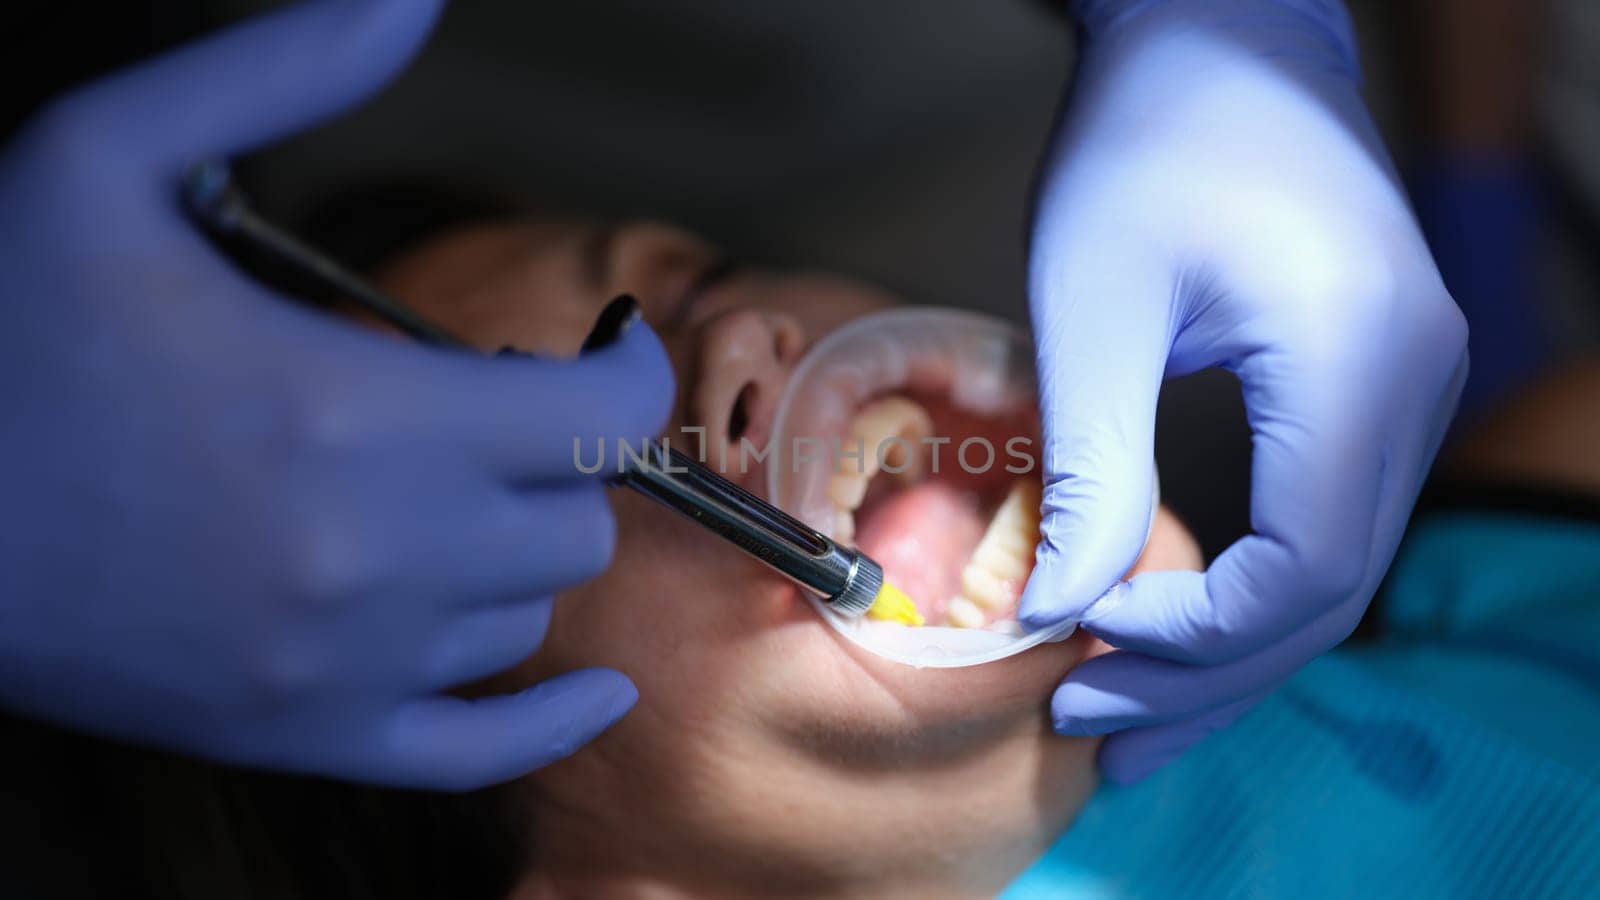 Dentist doctor applying adhesive for veneers and prosthetics in clinic closeup. Anesthesia in dentistry concept